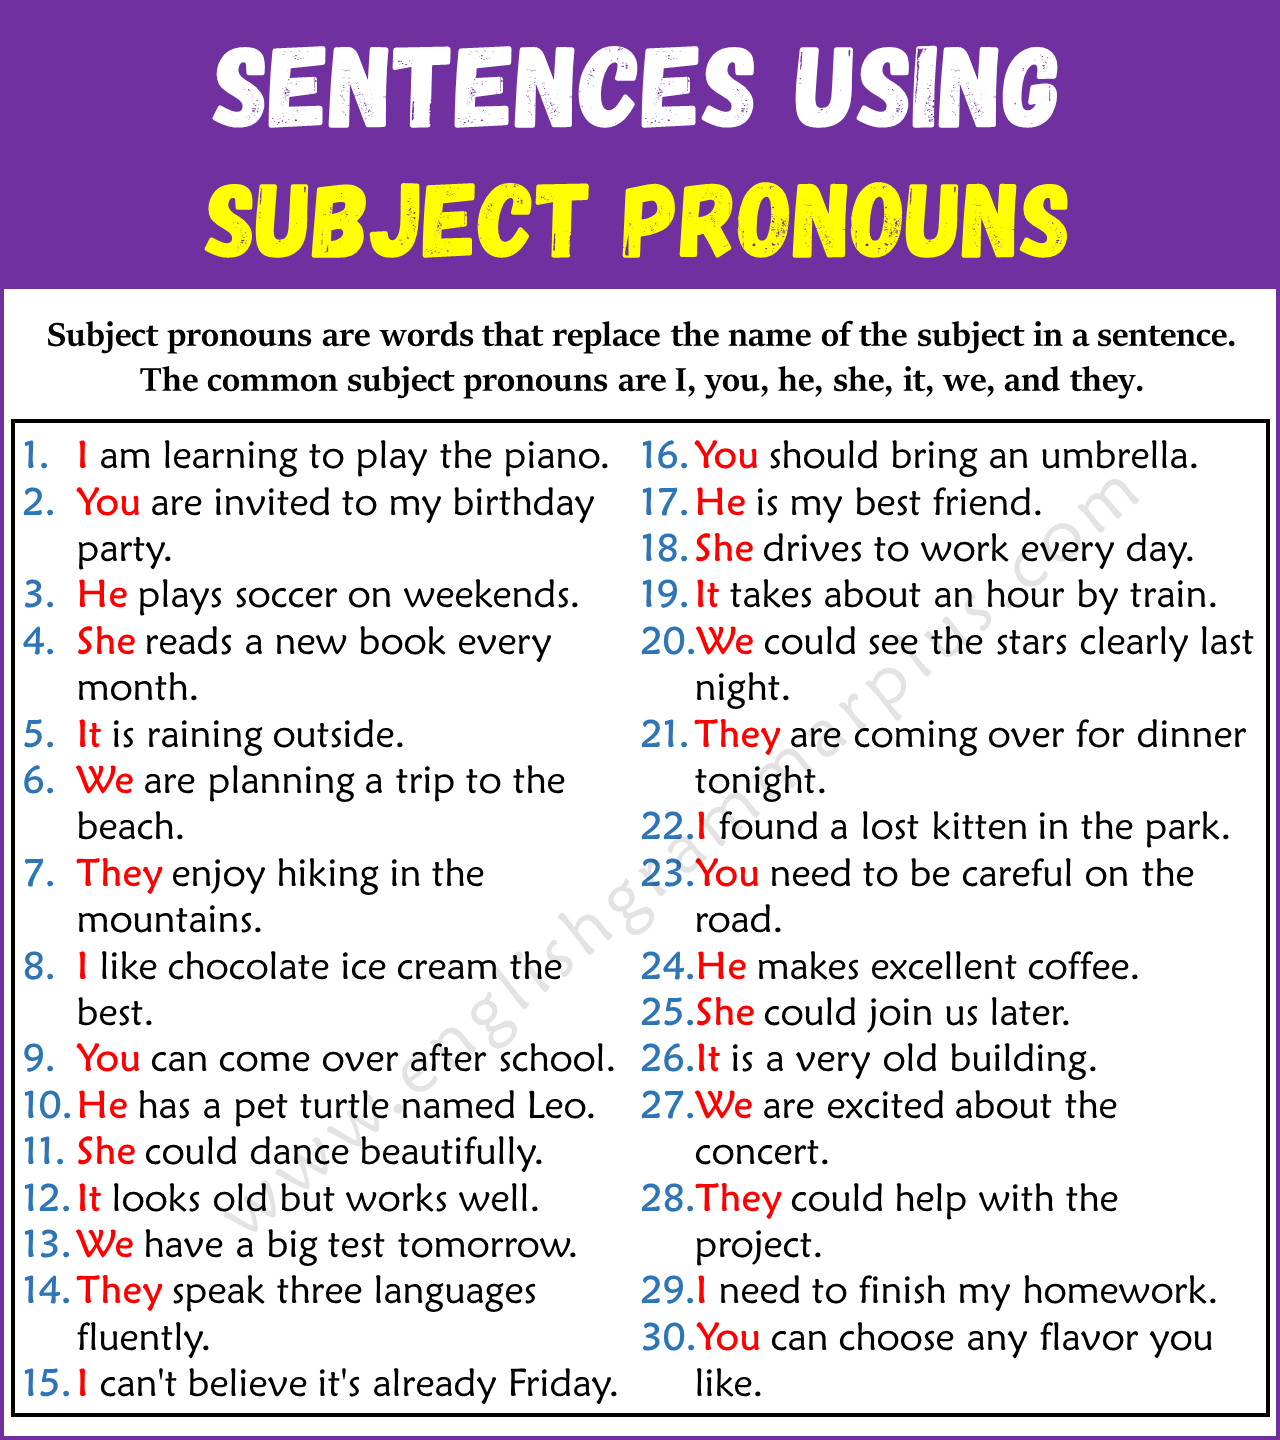 Examples of Subject Pronouns in Sentences